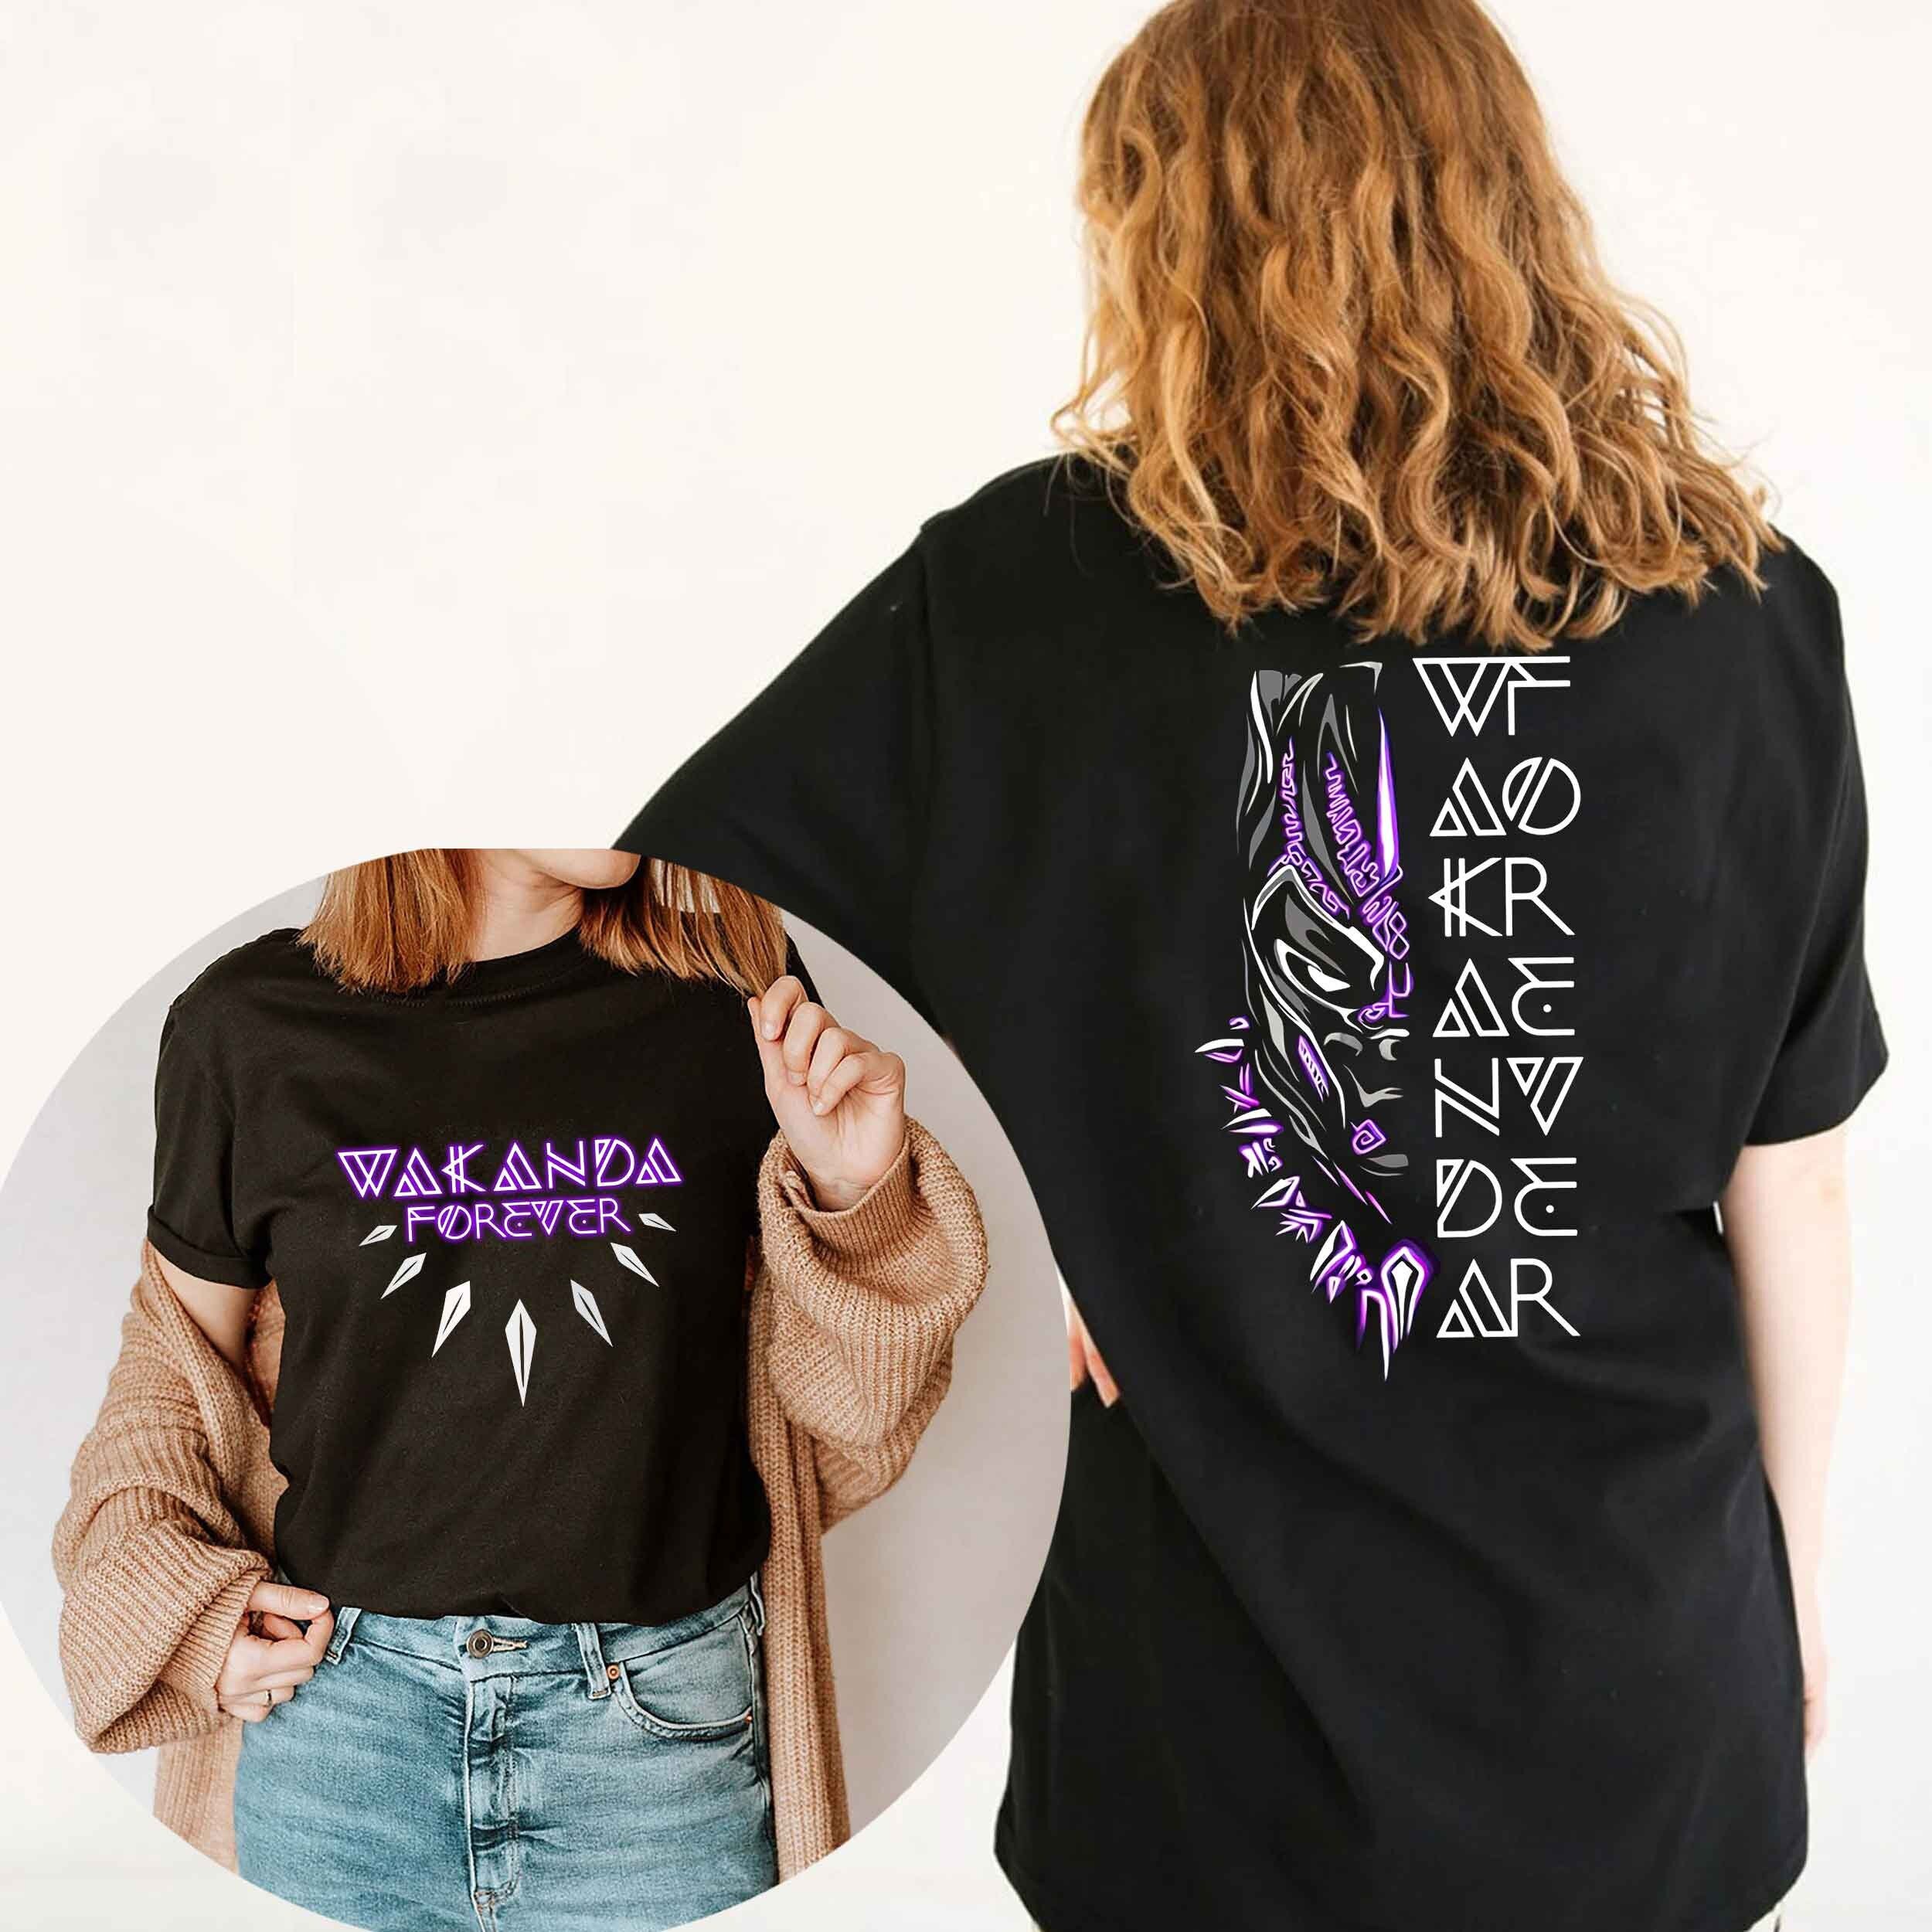 Discover Wakanda Forever Double Sided Shirt, Black Panther Shirt